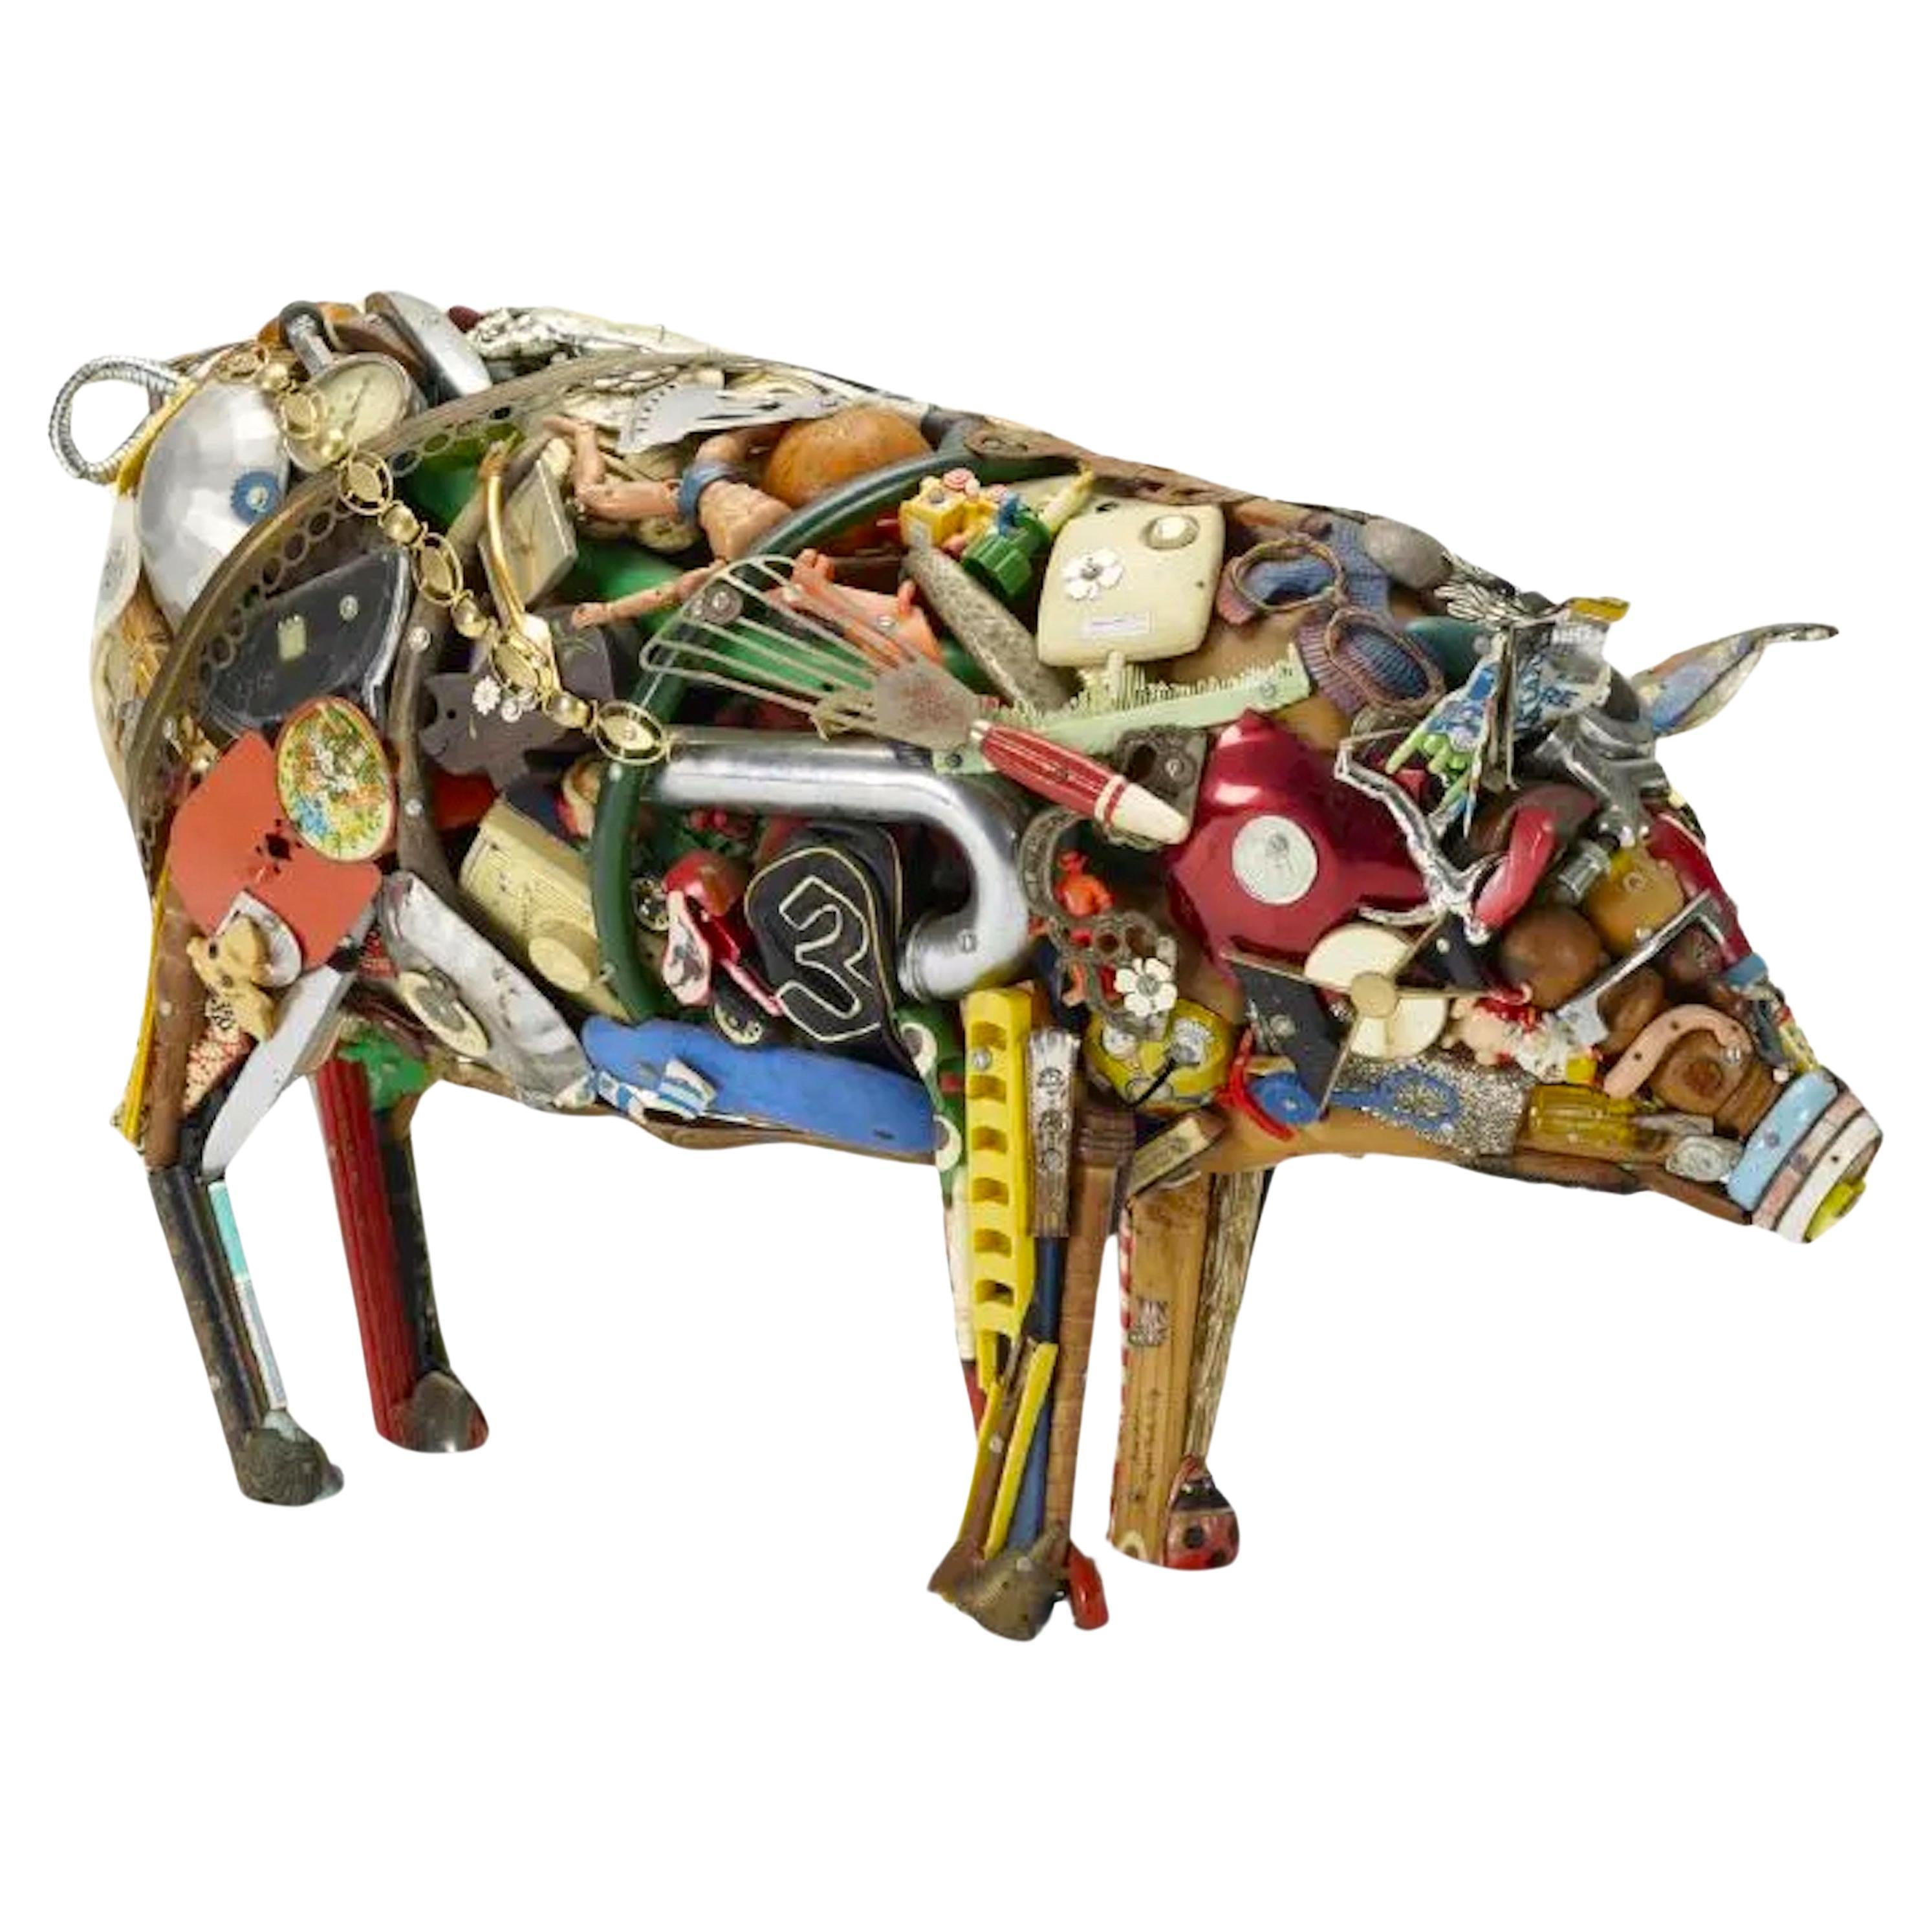 "Pig" Sculpture en Objects for Objects par Leo Sewell